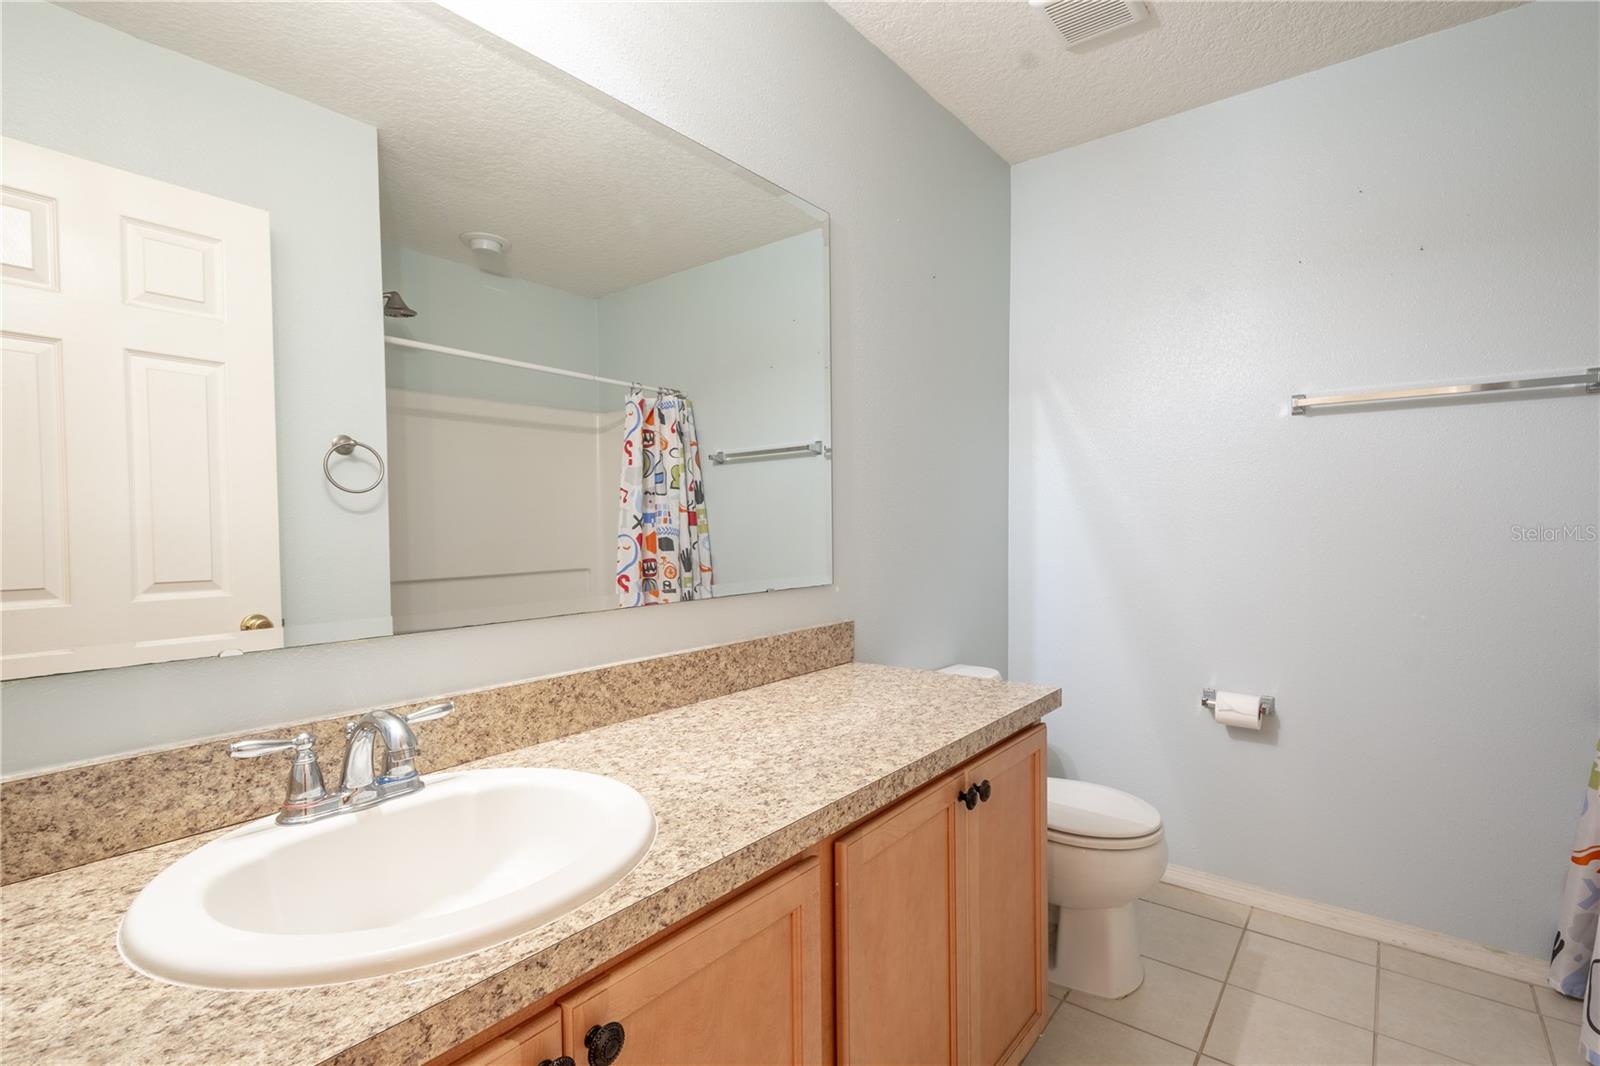 Bathroom three features a mirrored vanity with granite countertop and storage, a tub with shower and a ceramic tile floor.